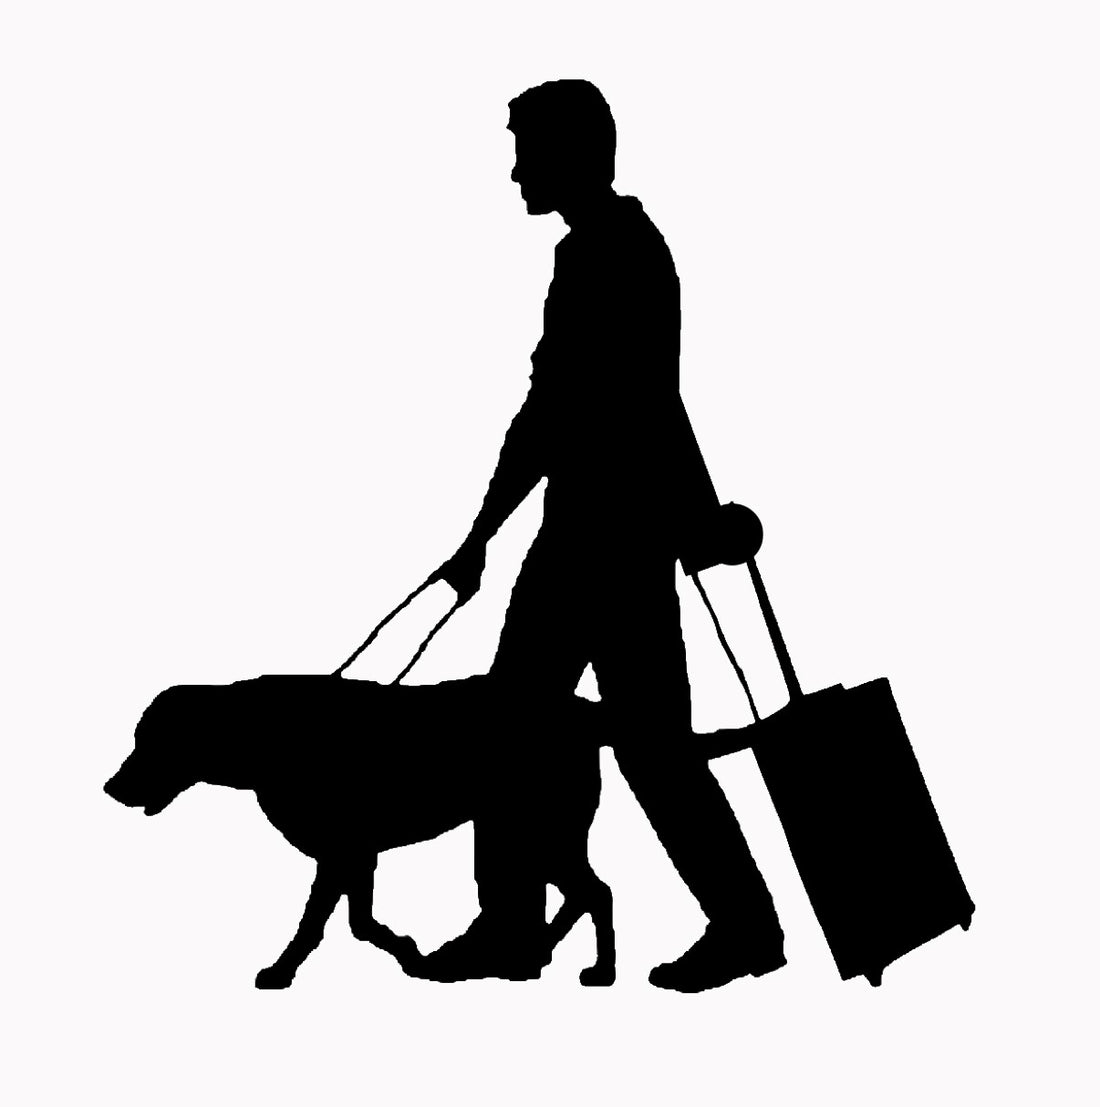 A silhouette of a man and his guide dog walking while the man is pulling a suitcase.